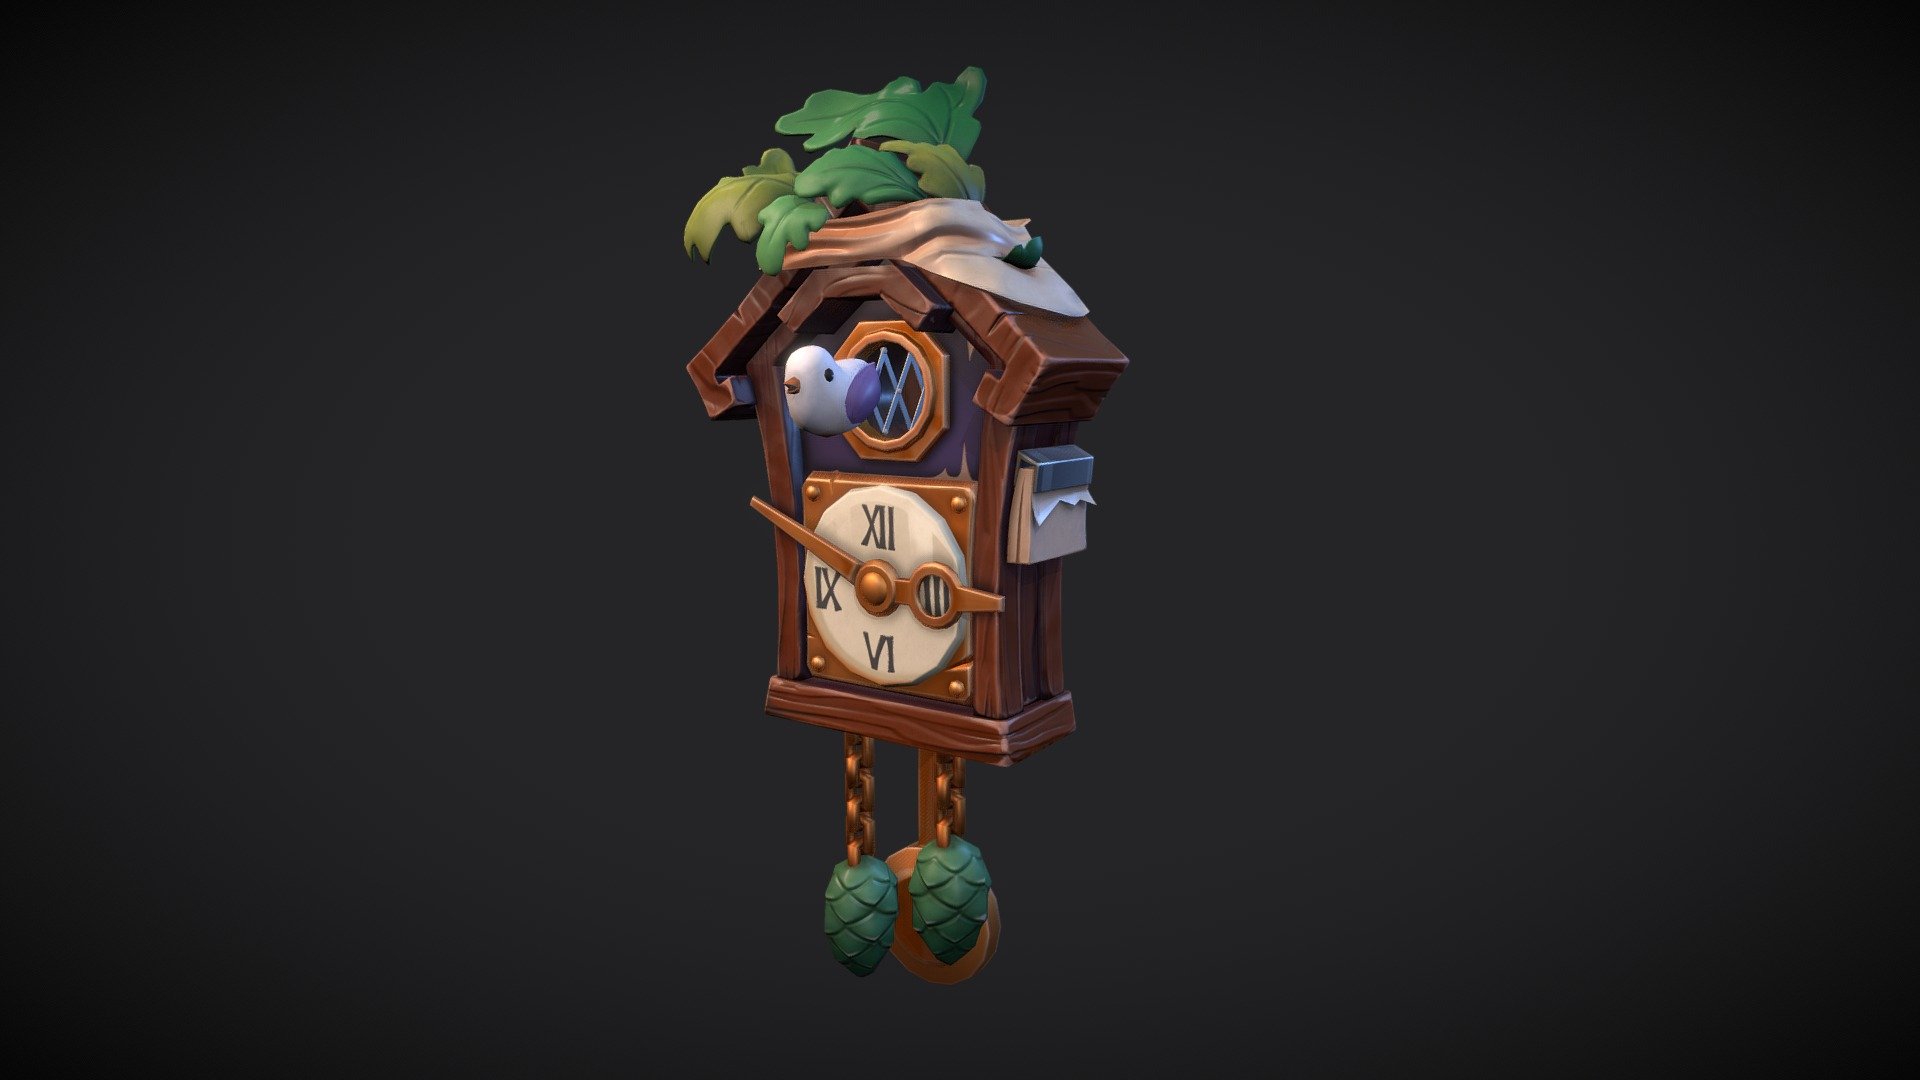 Game-Ready asset of The Cuckoo Clock
Concept by Room8Studio

The model itself contains one material. The UVs of the model are unwrapped.

The preview images were rendered using the Marmoset Toolbag 3d model